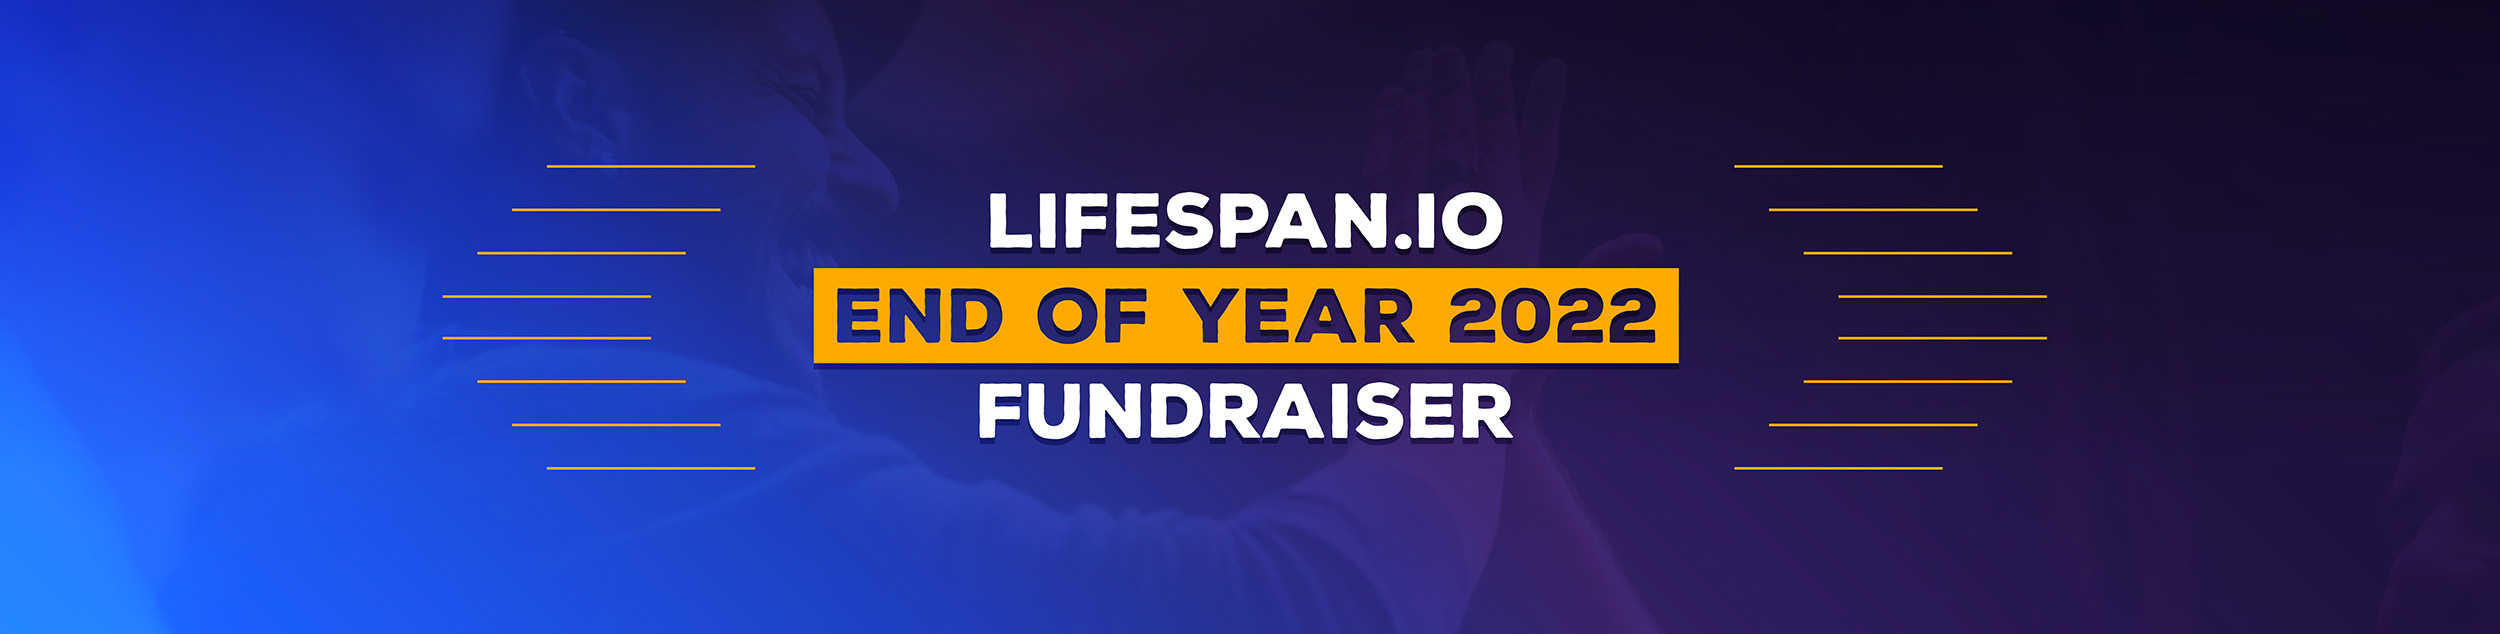 Lifespan.io End of Year 2022 Fundraiser